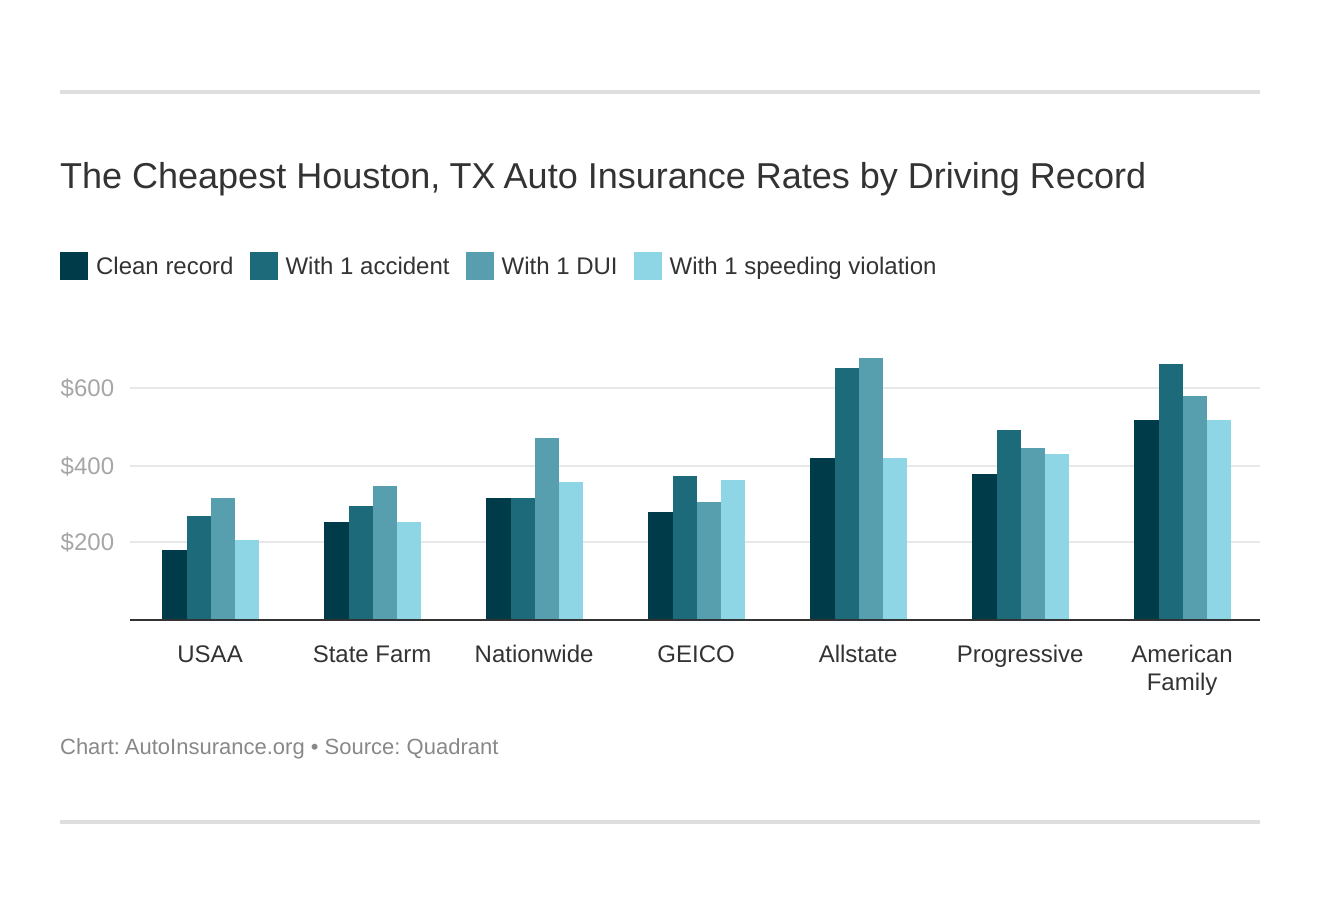 The Cheapest Houston, TX Auto Insurance Rates by Driving Record